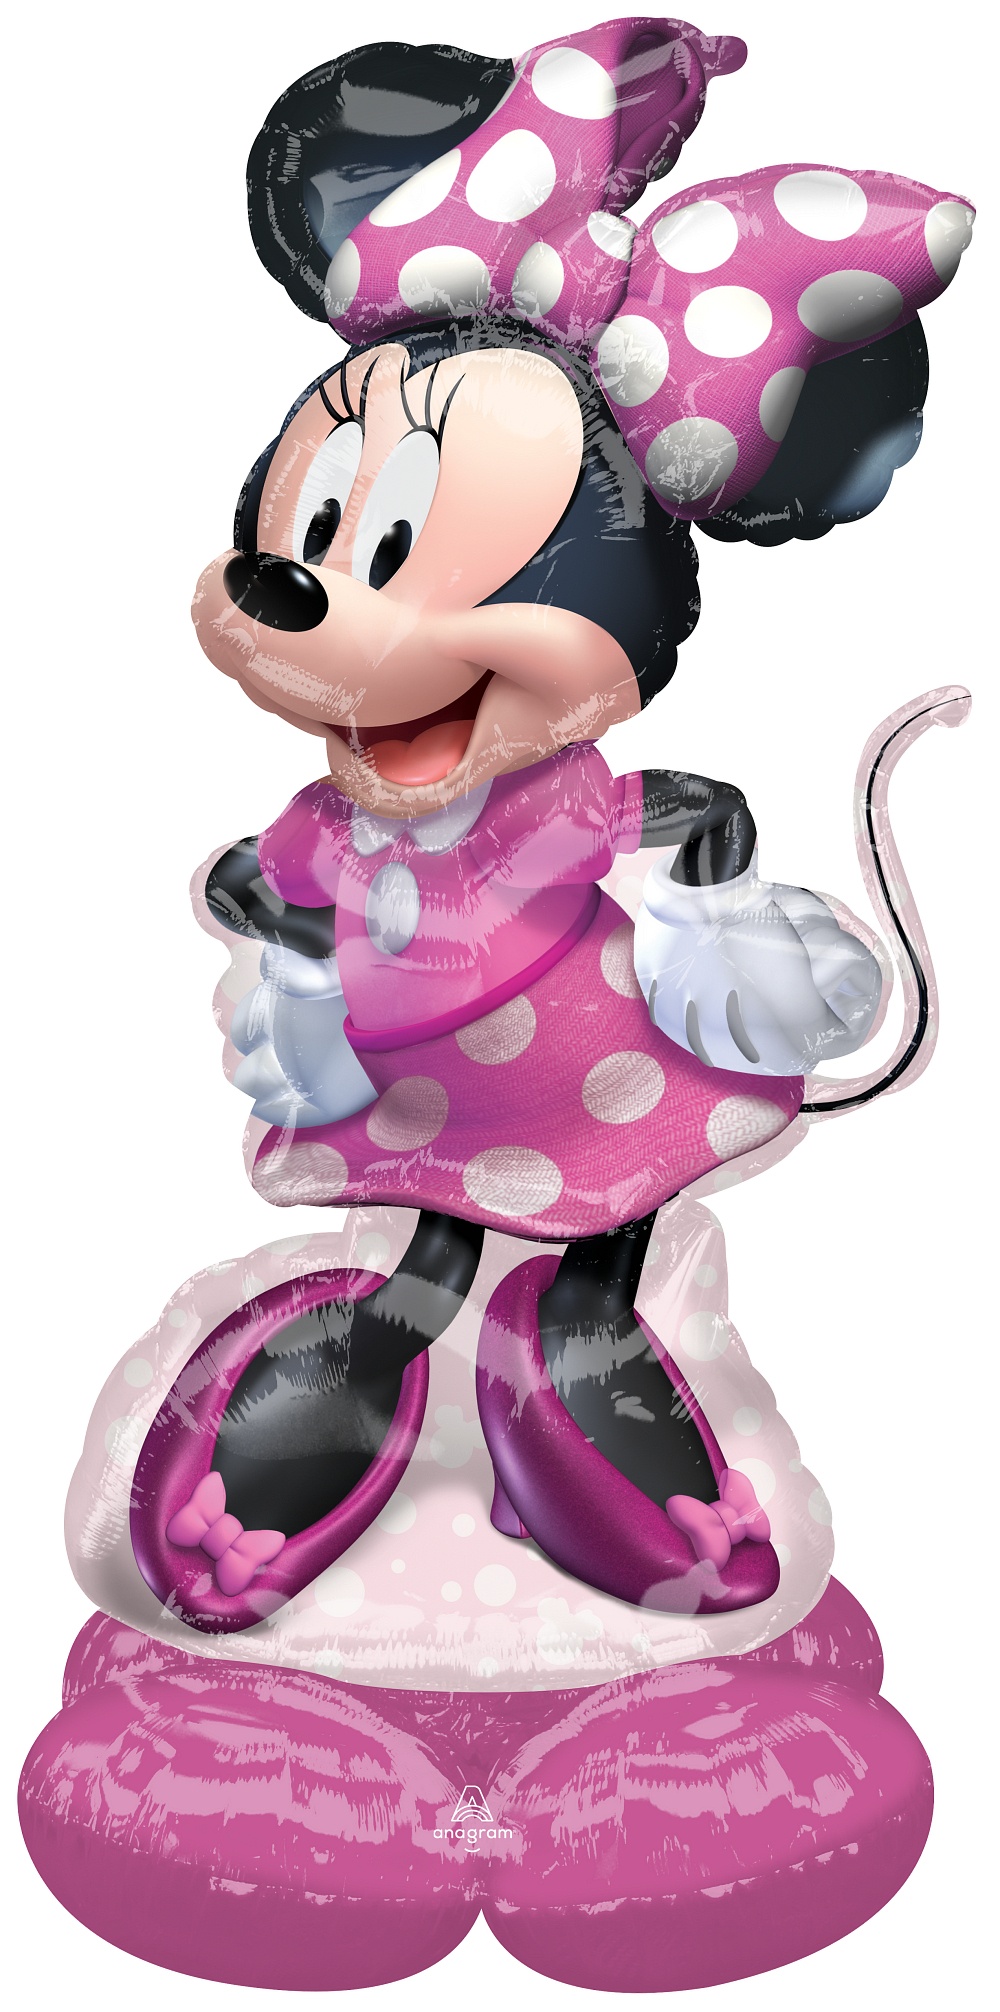 43372-airloonz-minnie-mouse-forever.psd.jpg